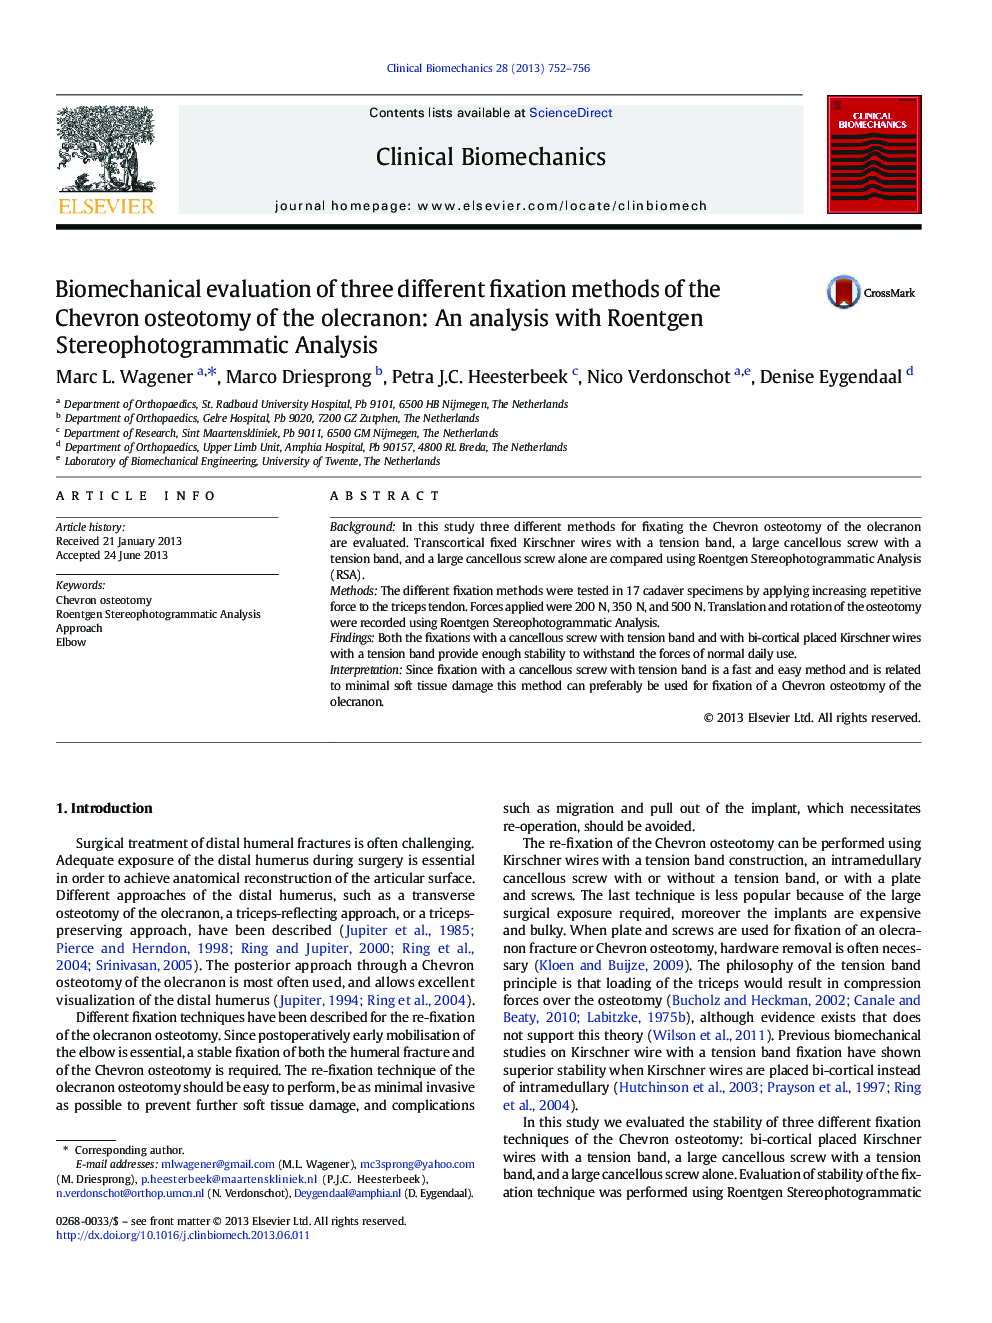 Biomechanical evaluation of three different fixation methods of the Chevron osteotomy of the olecranon: An analysis with Roentgen Stereophotogrammatic Analysis